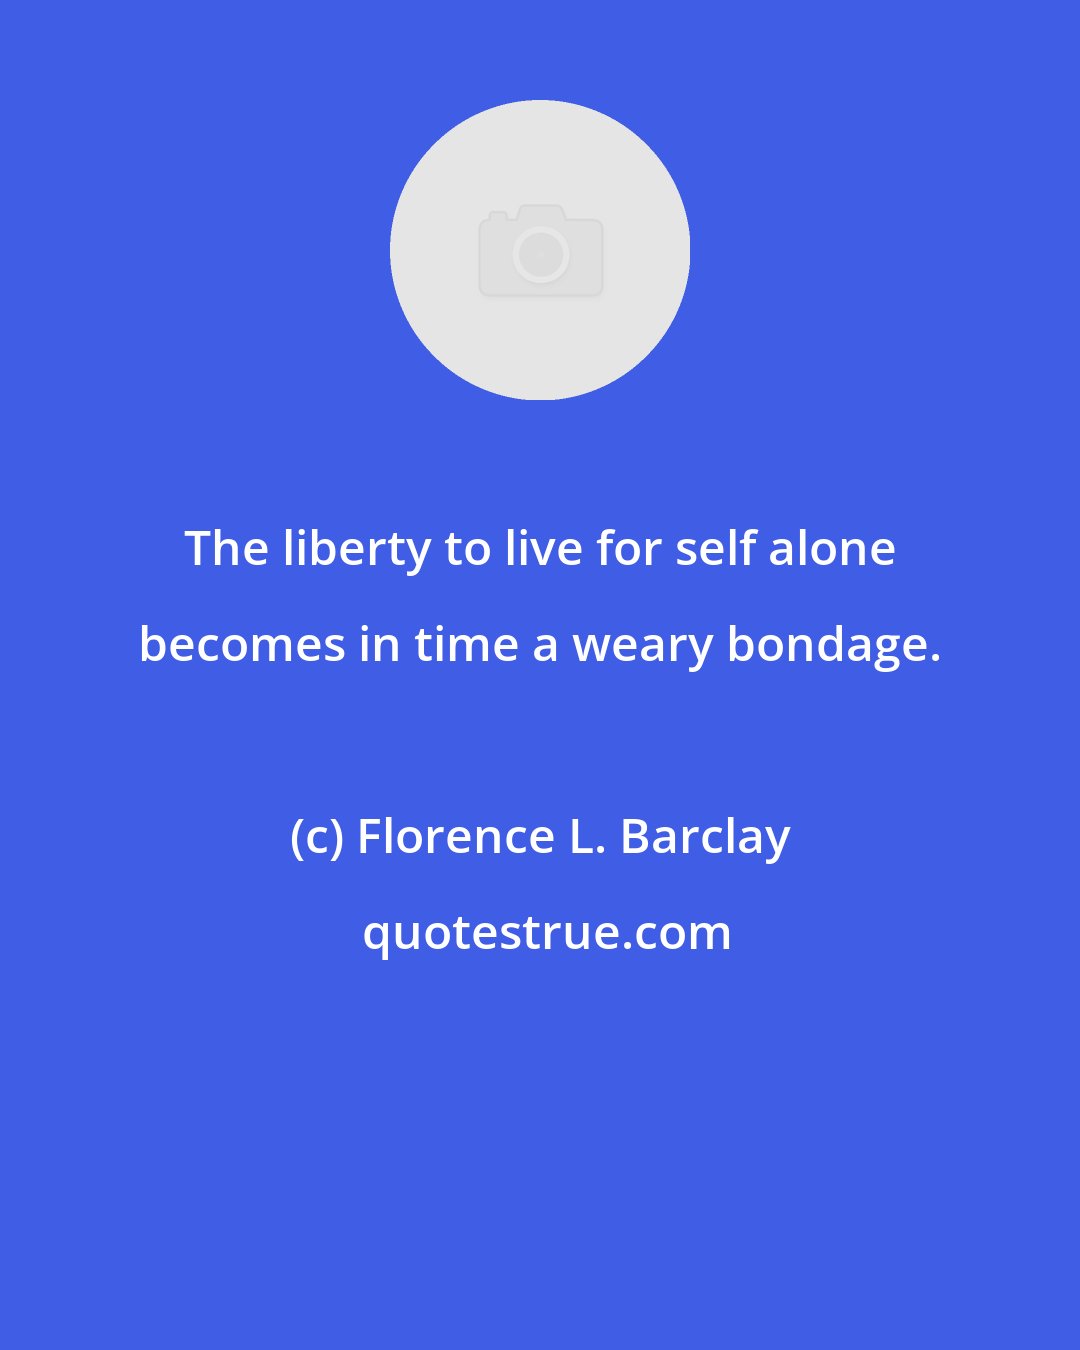 Florence L. Barclay: The liberty to live for self alone becomes in time a weary bondage.